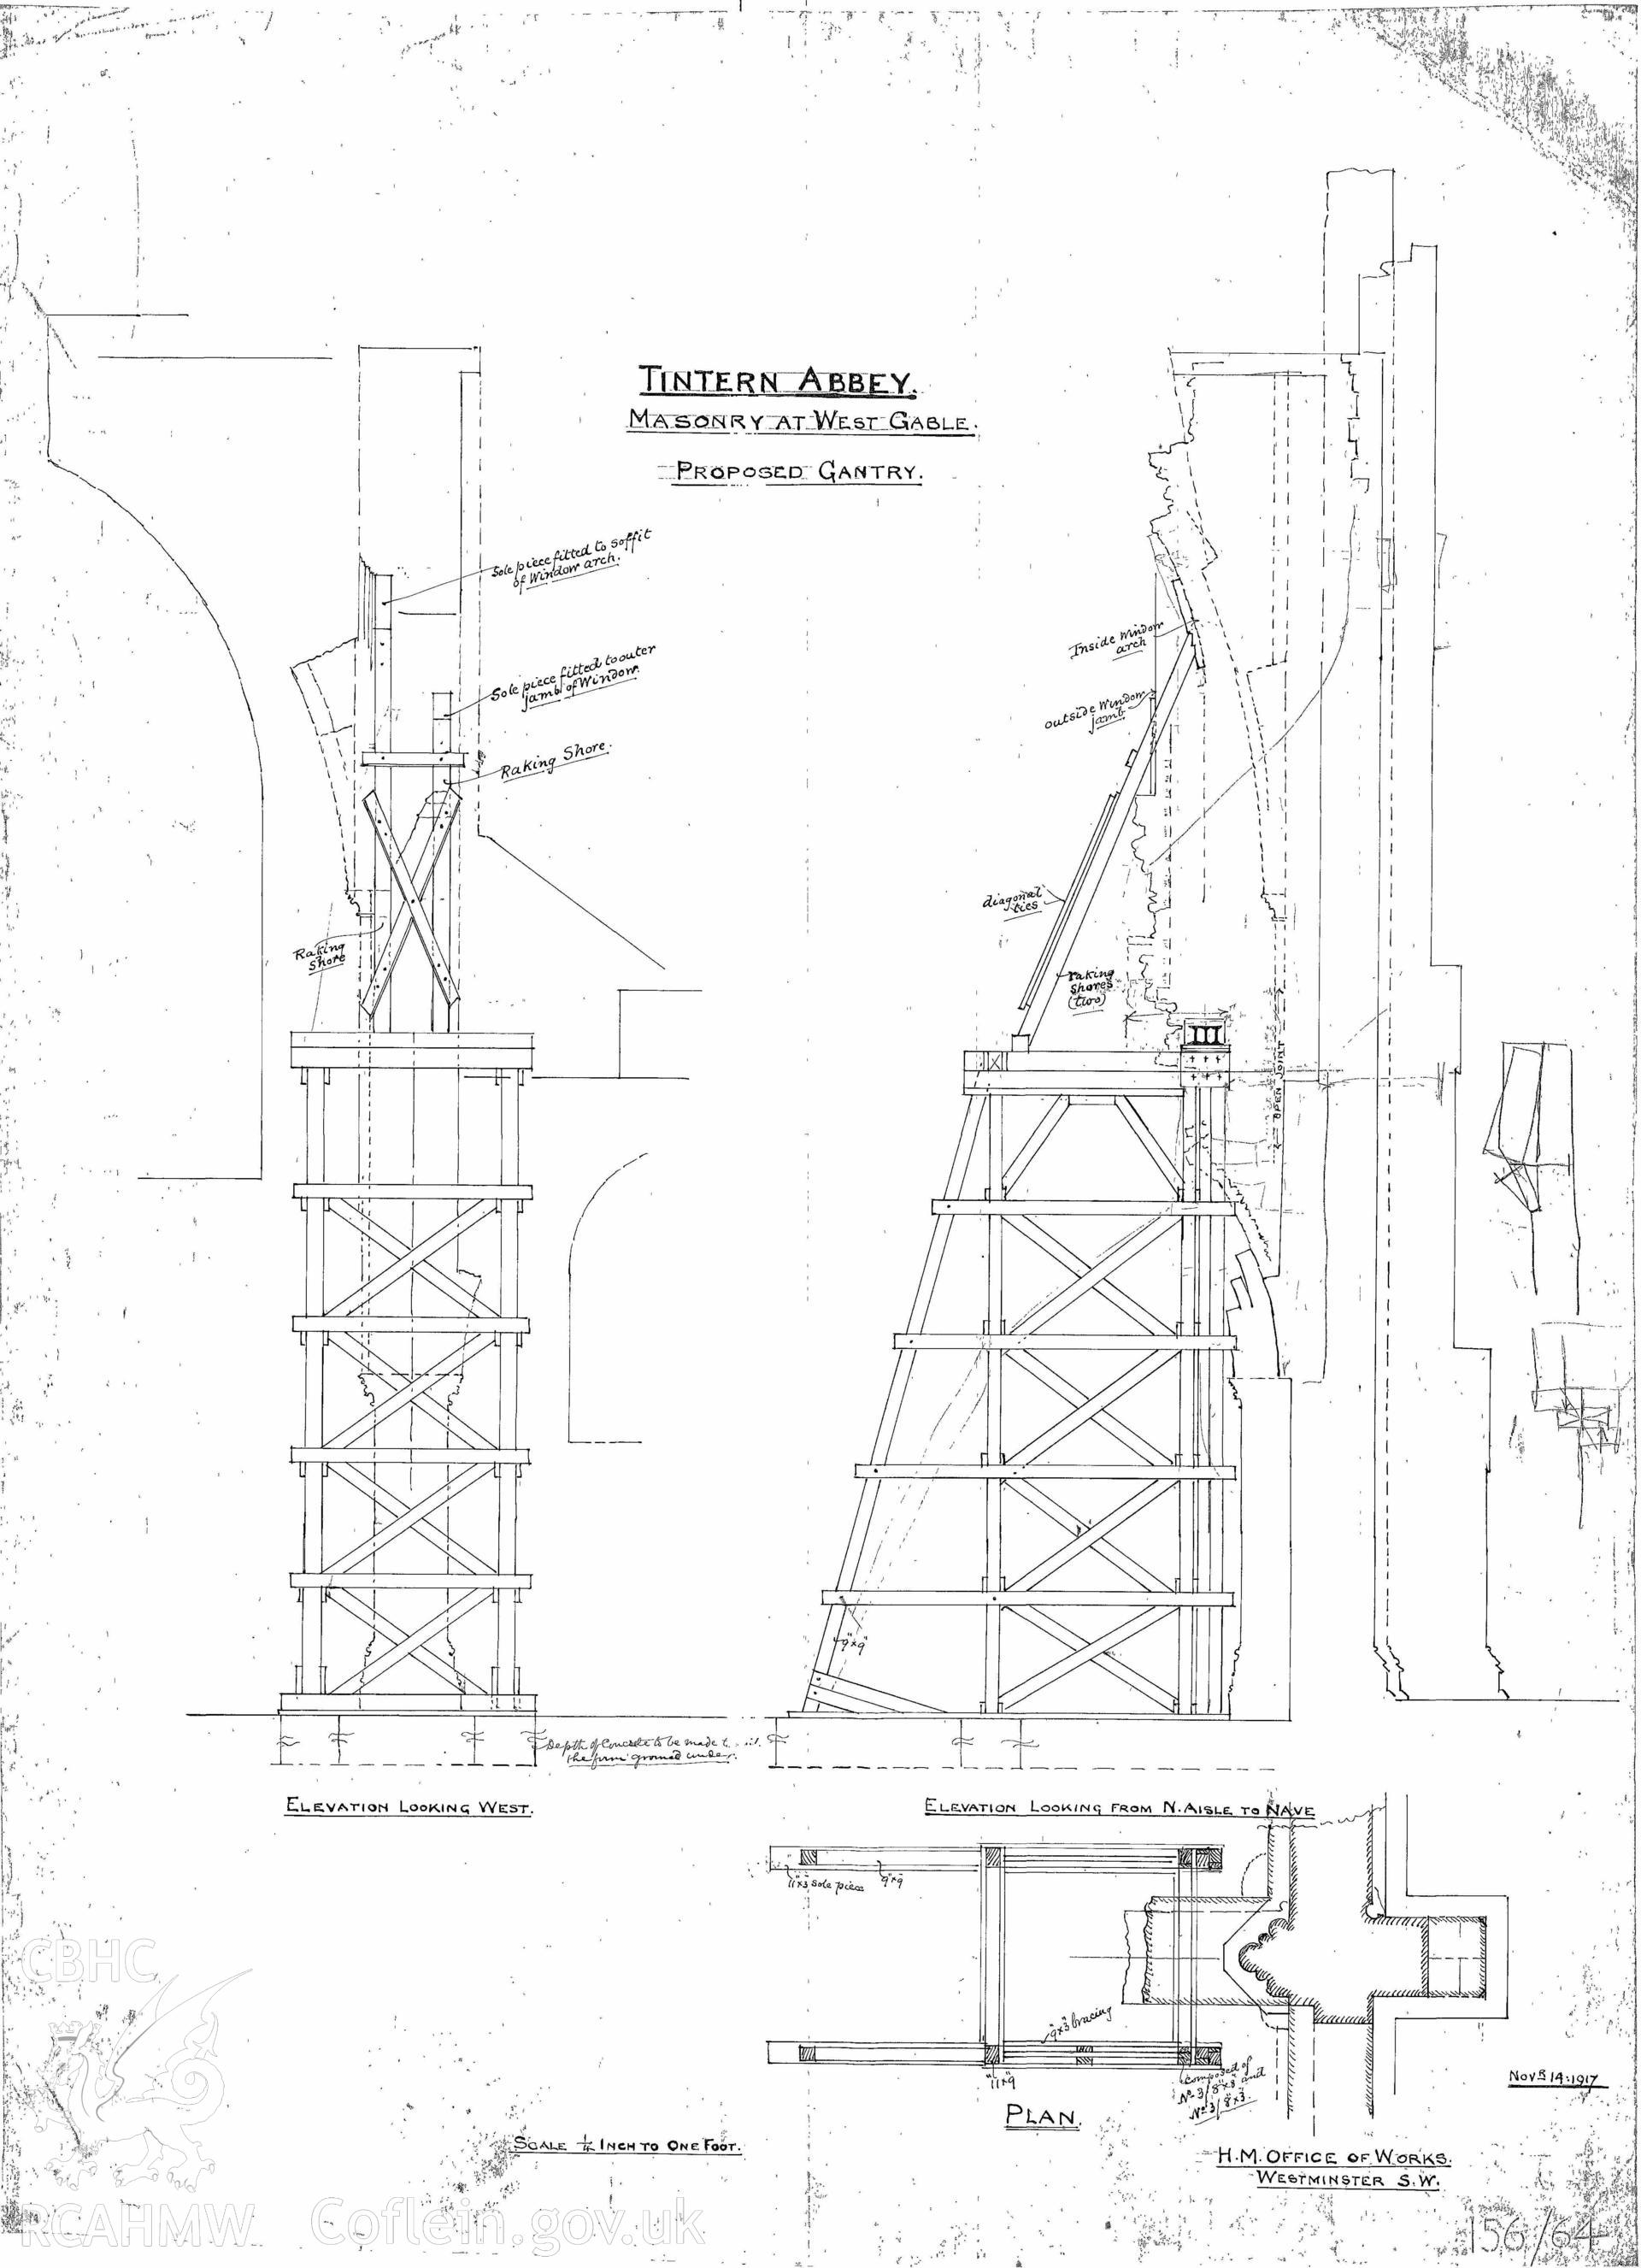 Cadw guardianship monument drawing of Tintern Abbey. Proposed Gantry at West Gable. Cadw ref. No. 156/64. Scale 1:48.